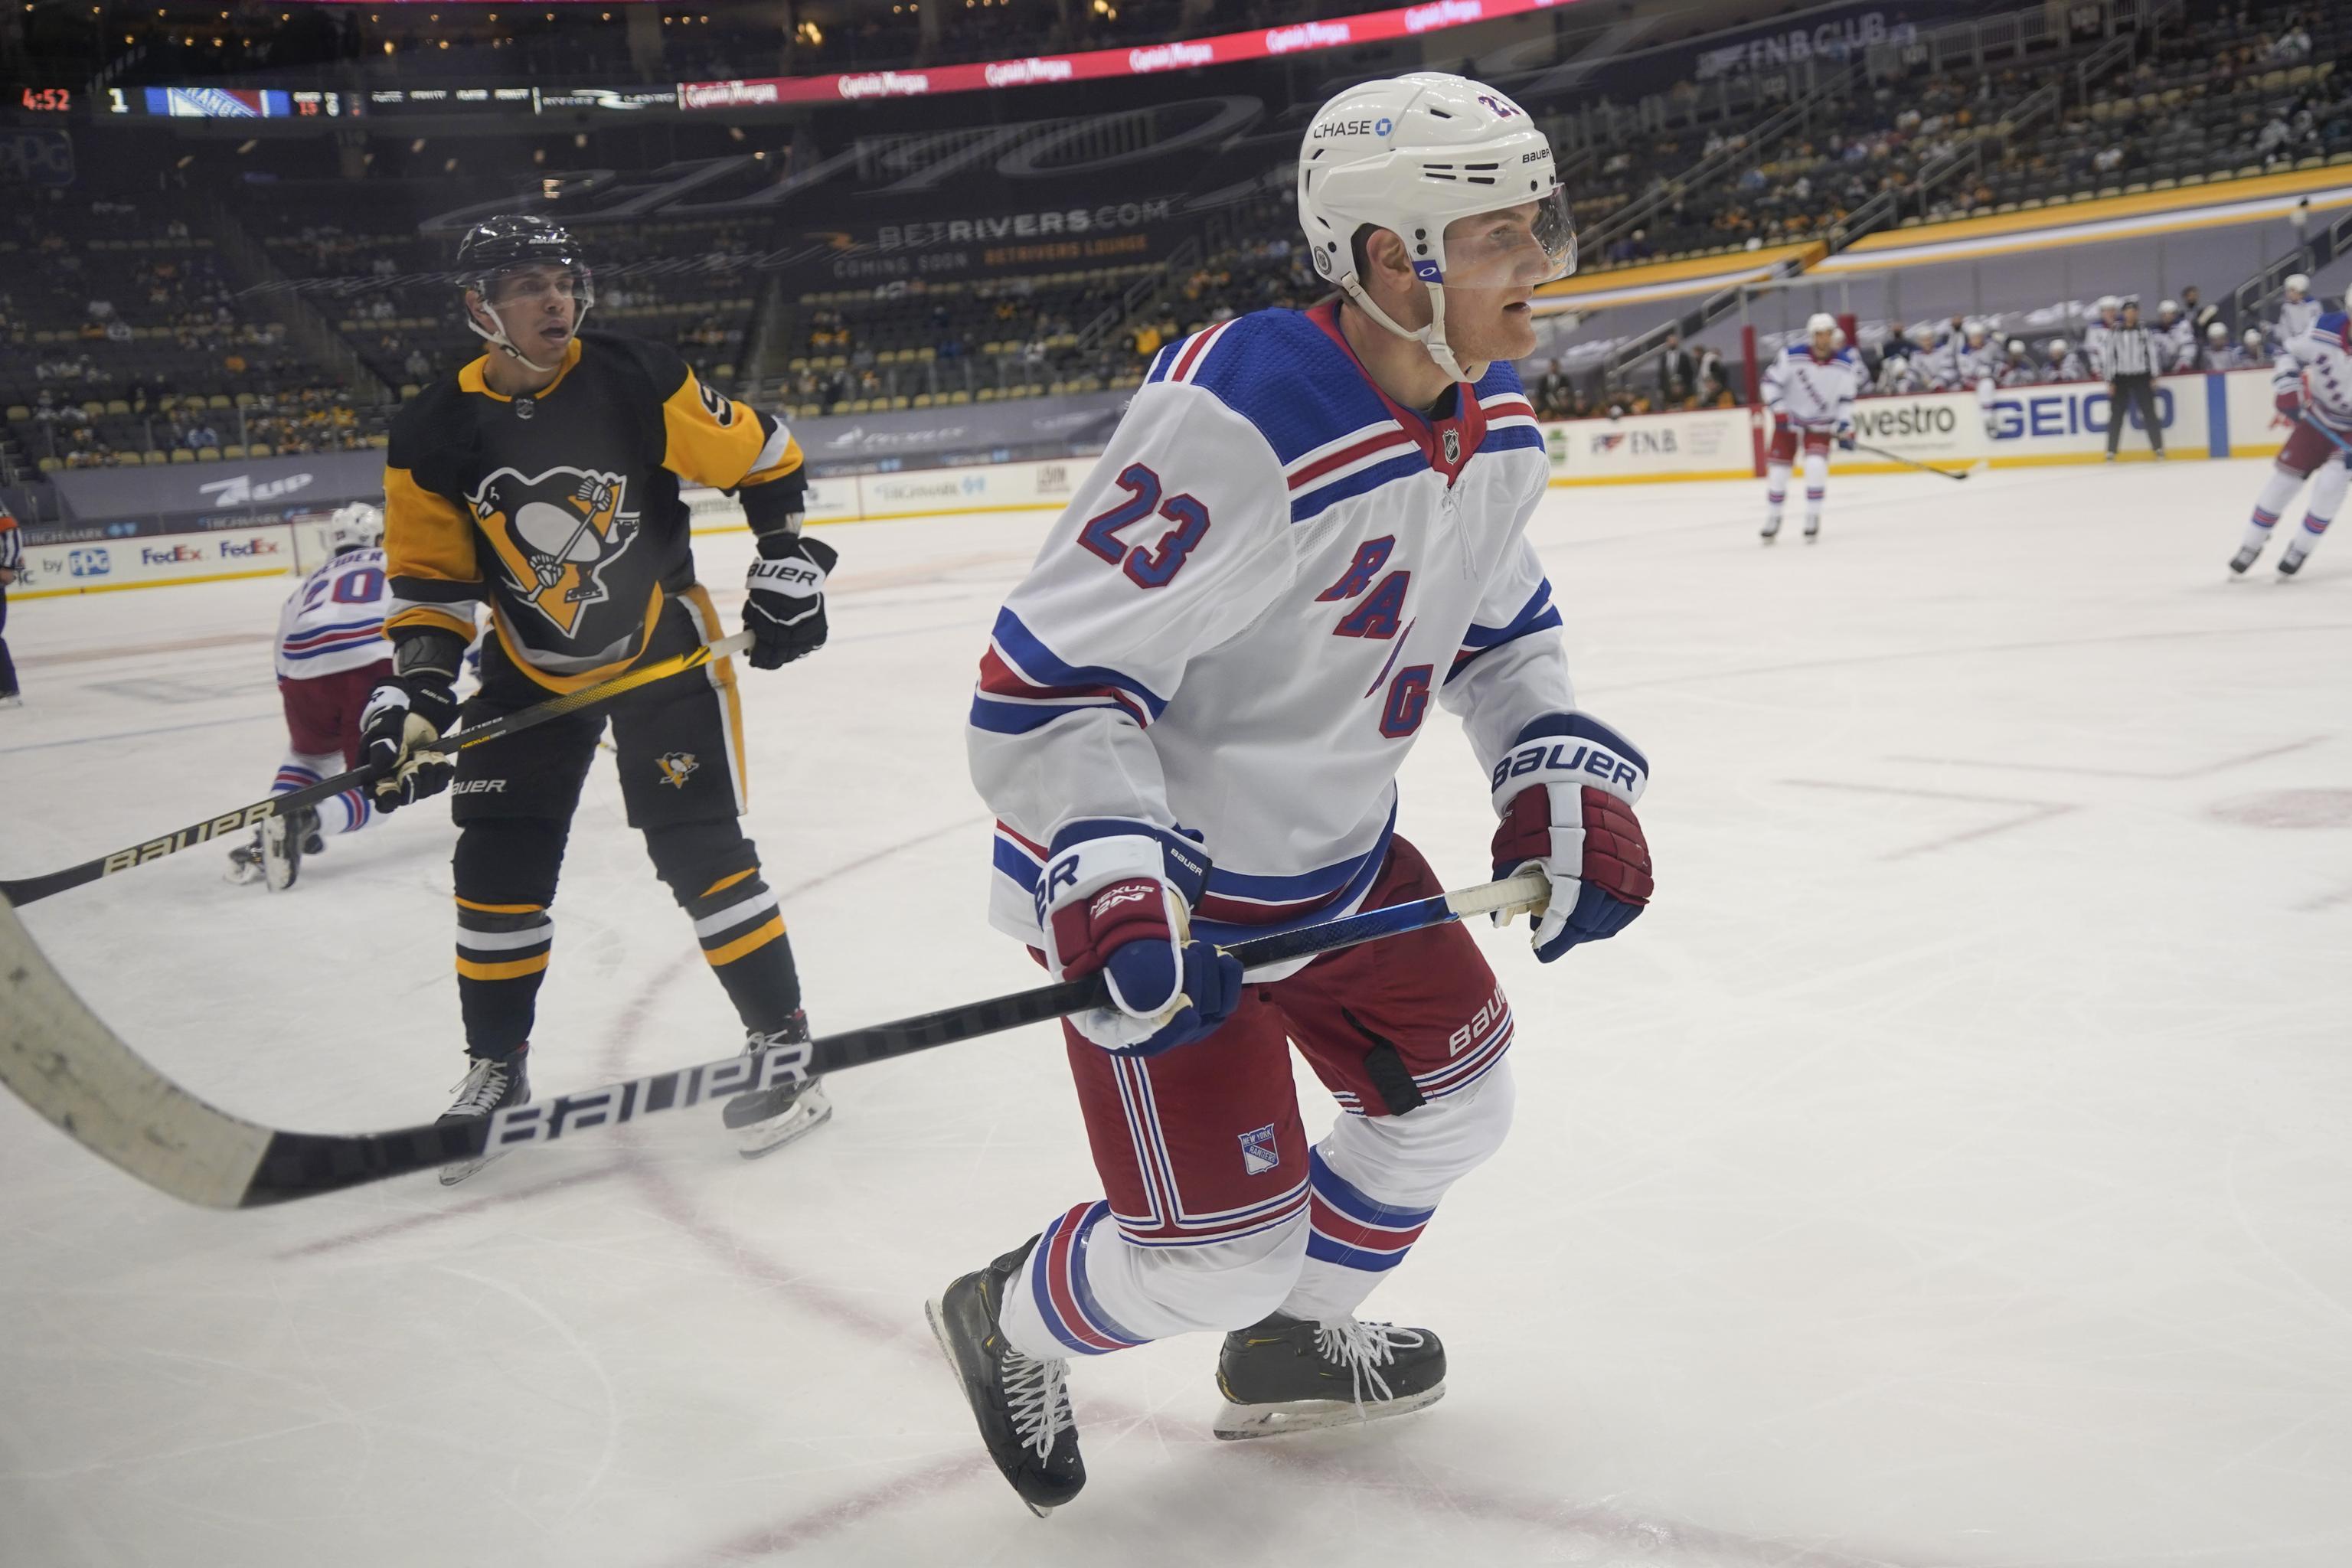 The New York Rangers: Shuffling in Buffalo, a tale of two games